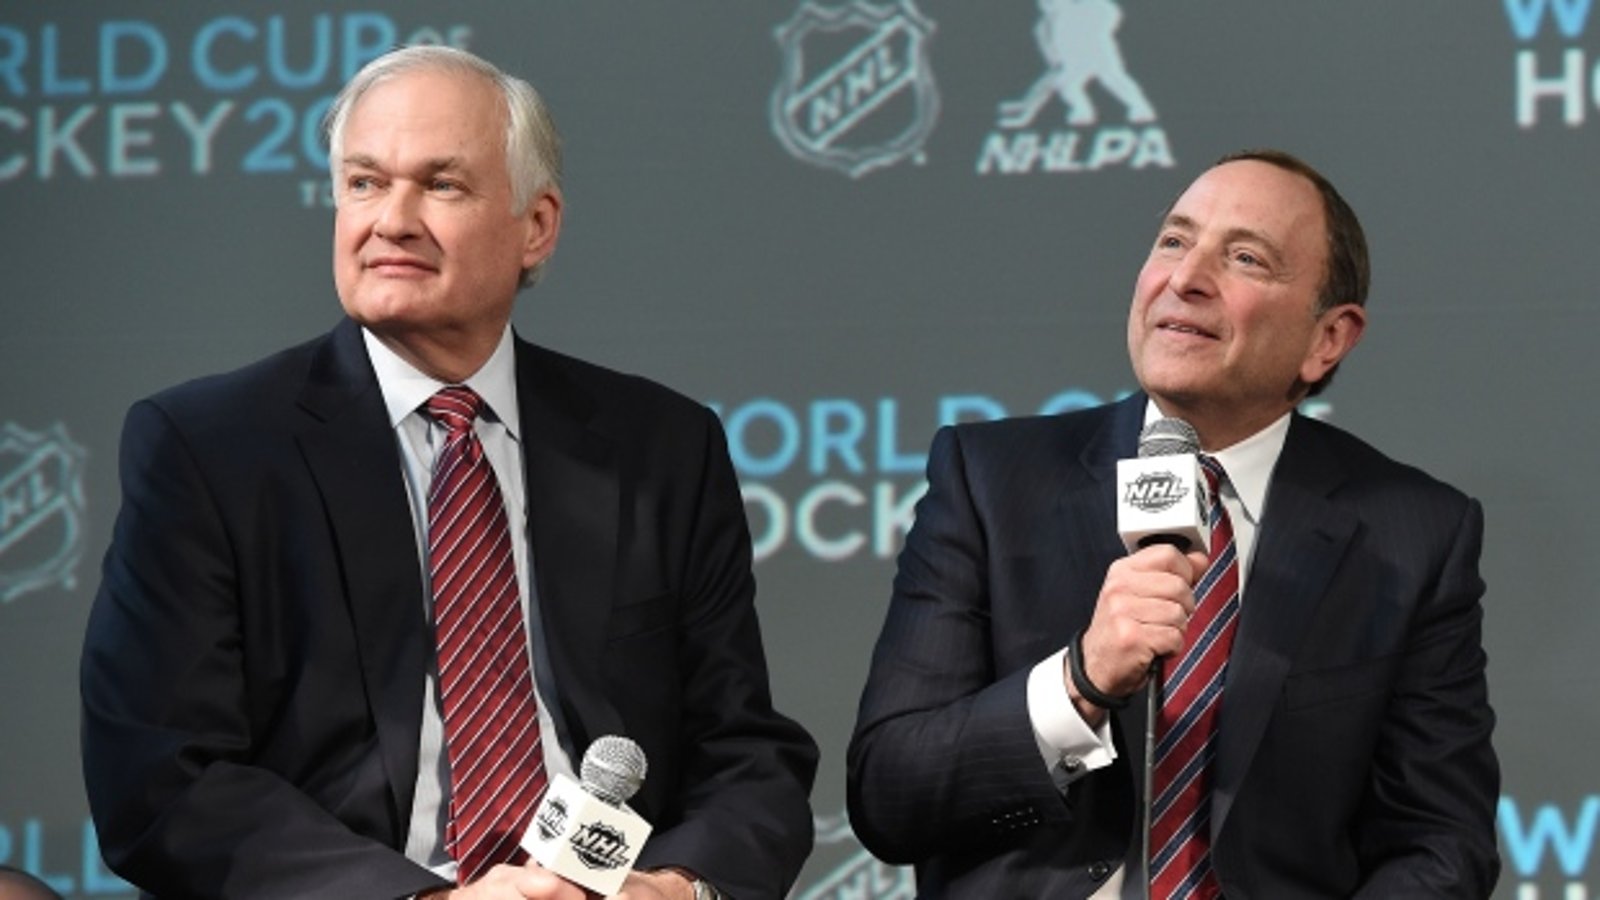 Negotiations between NHL and NHLPA have become “acrimonious.”